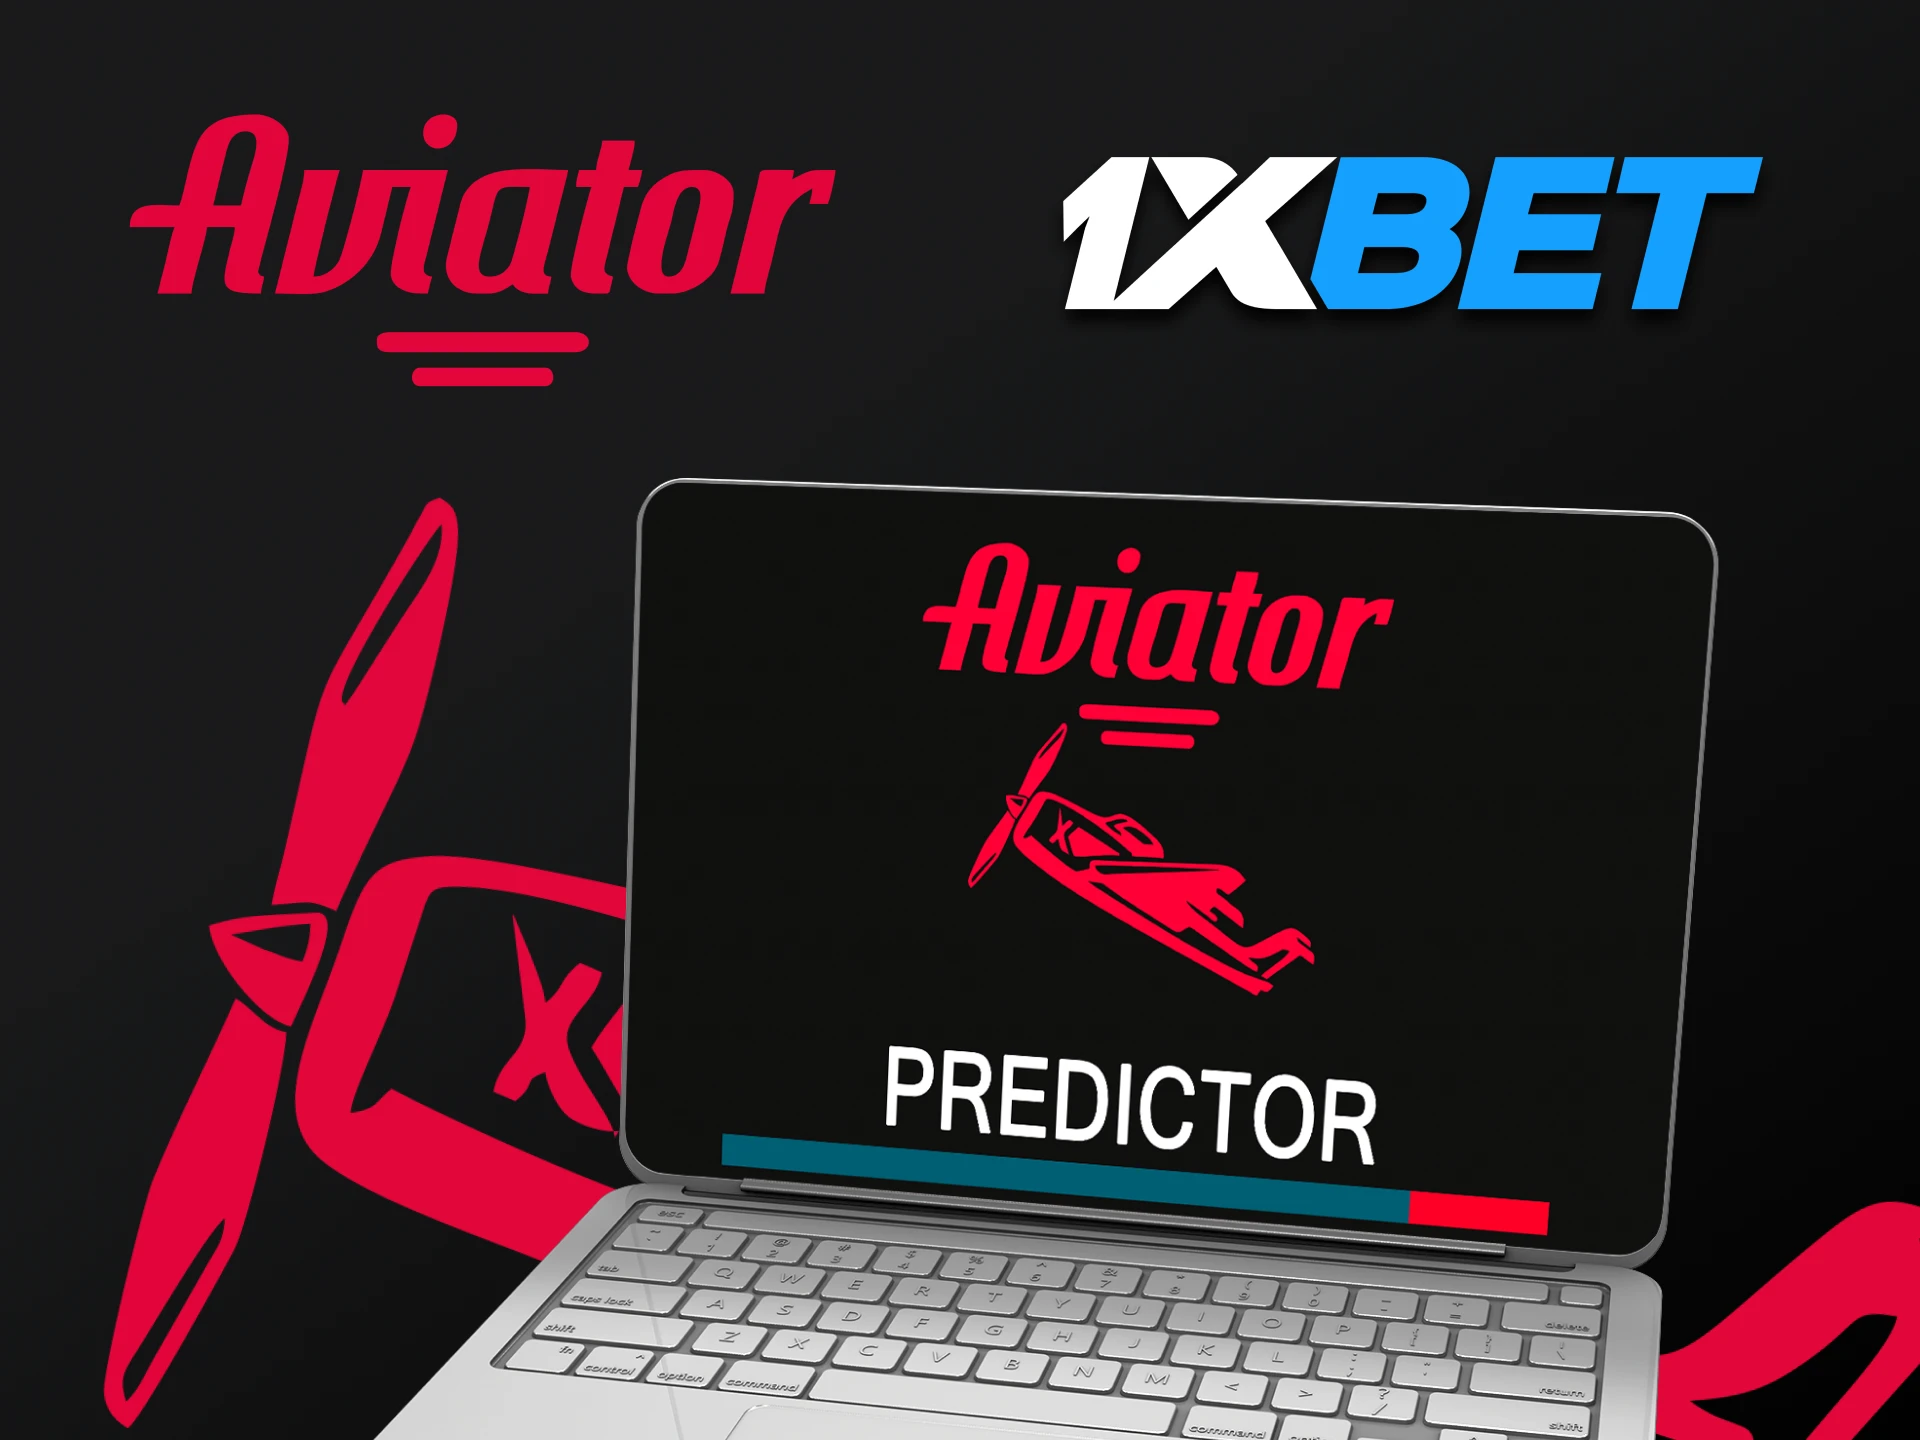 We will talk about Predictor for 1xbet.